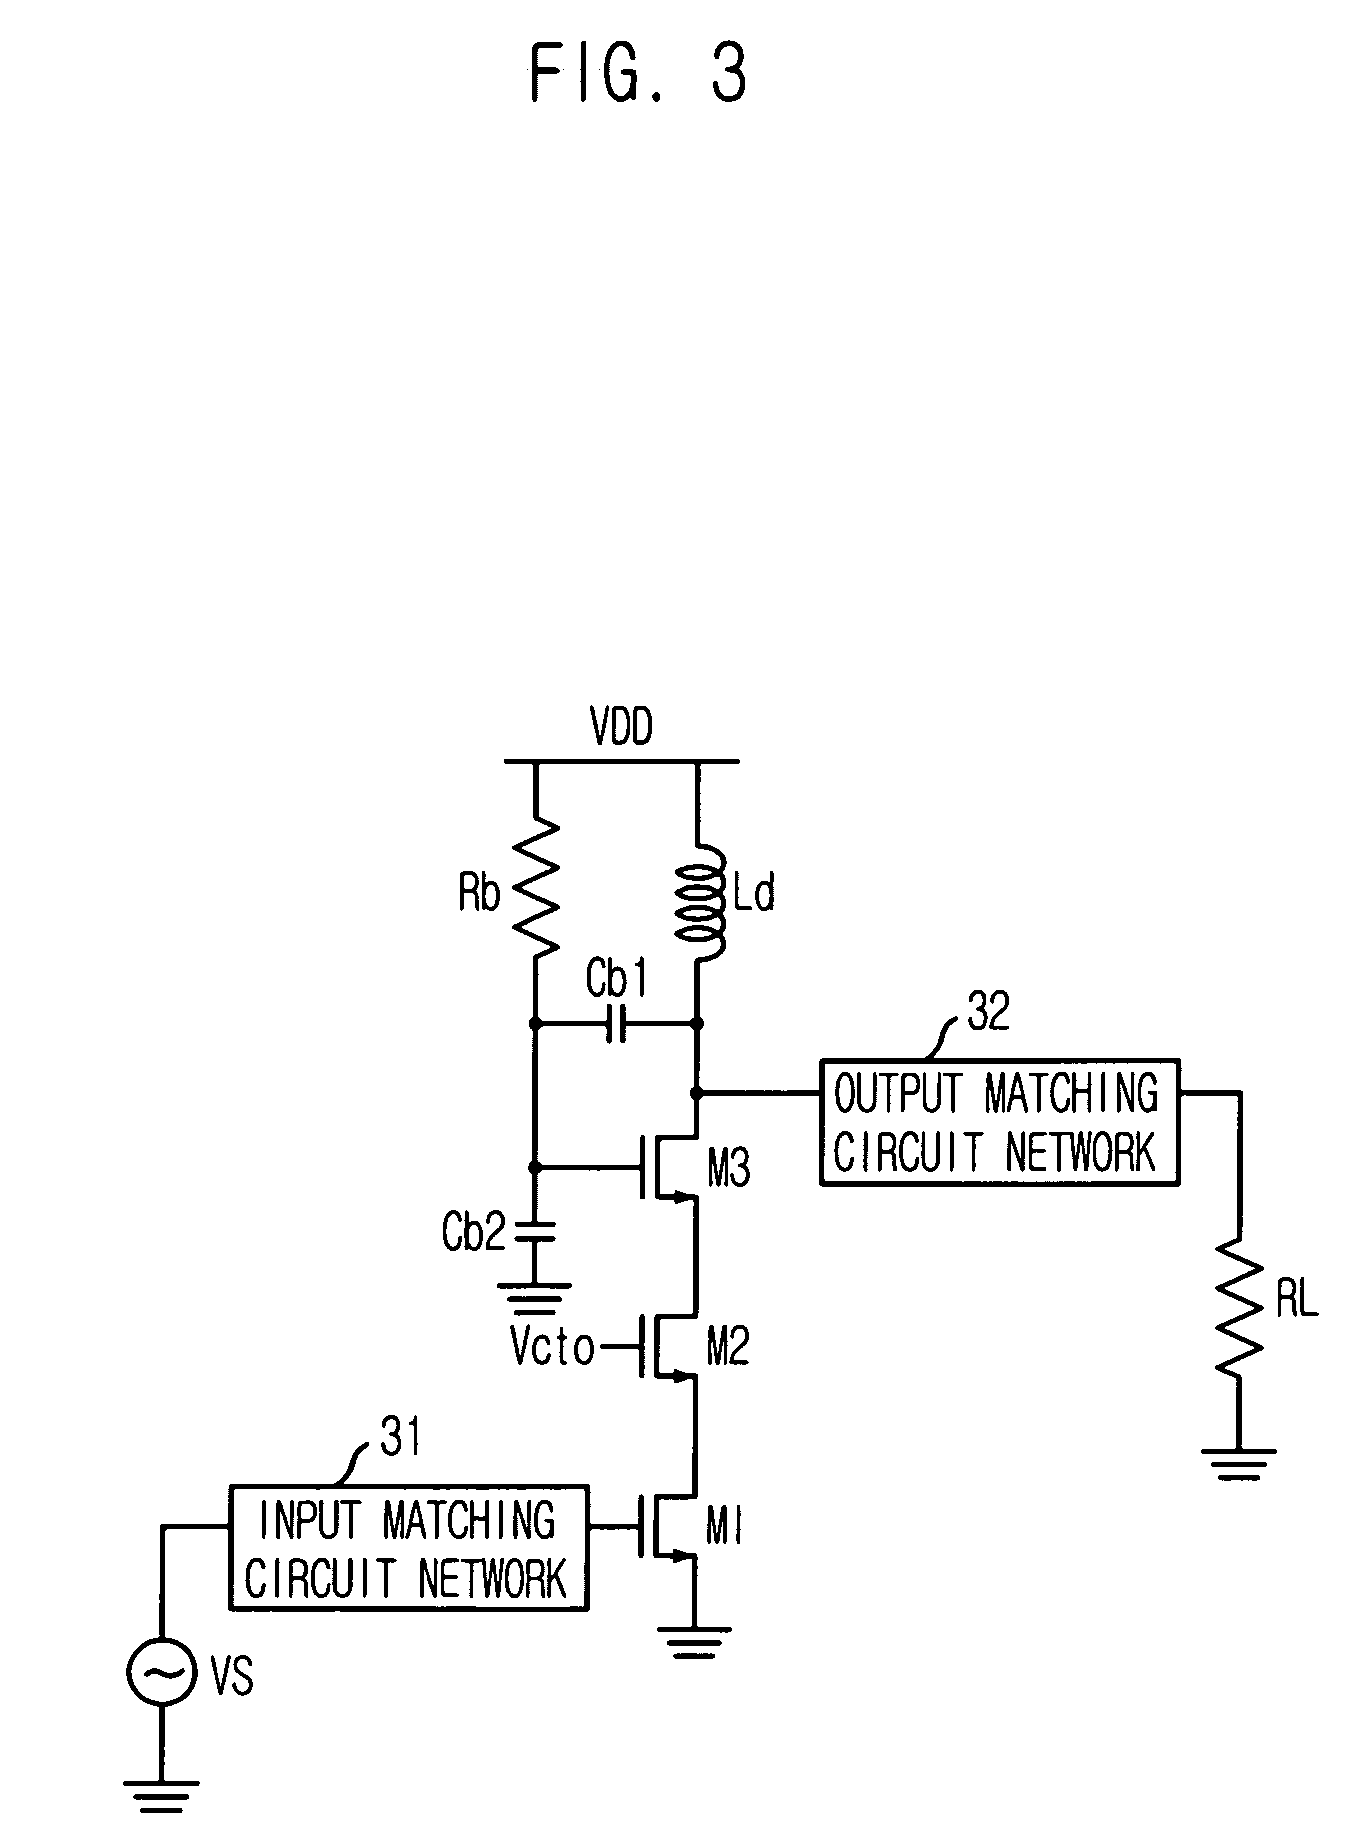 Triple cascode power amplifier of inner parallel configuration with dynamic gate bias technique